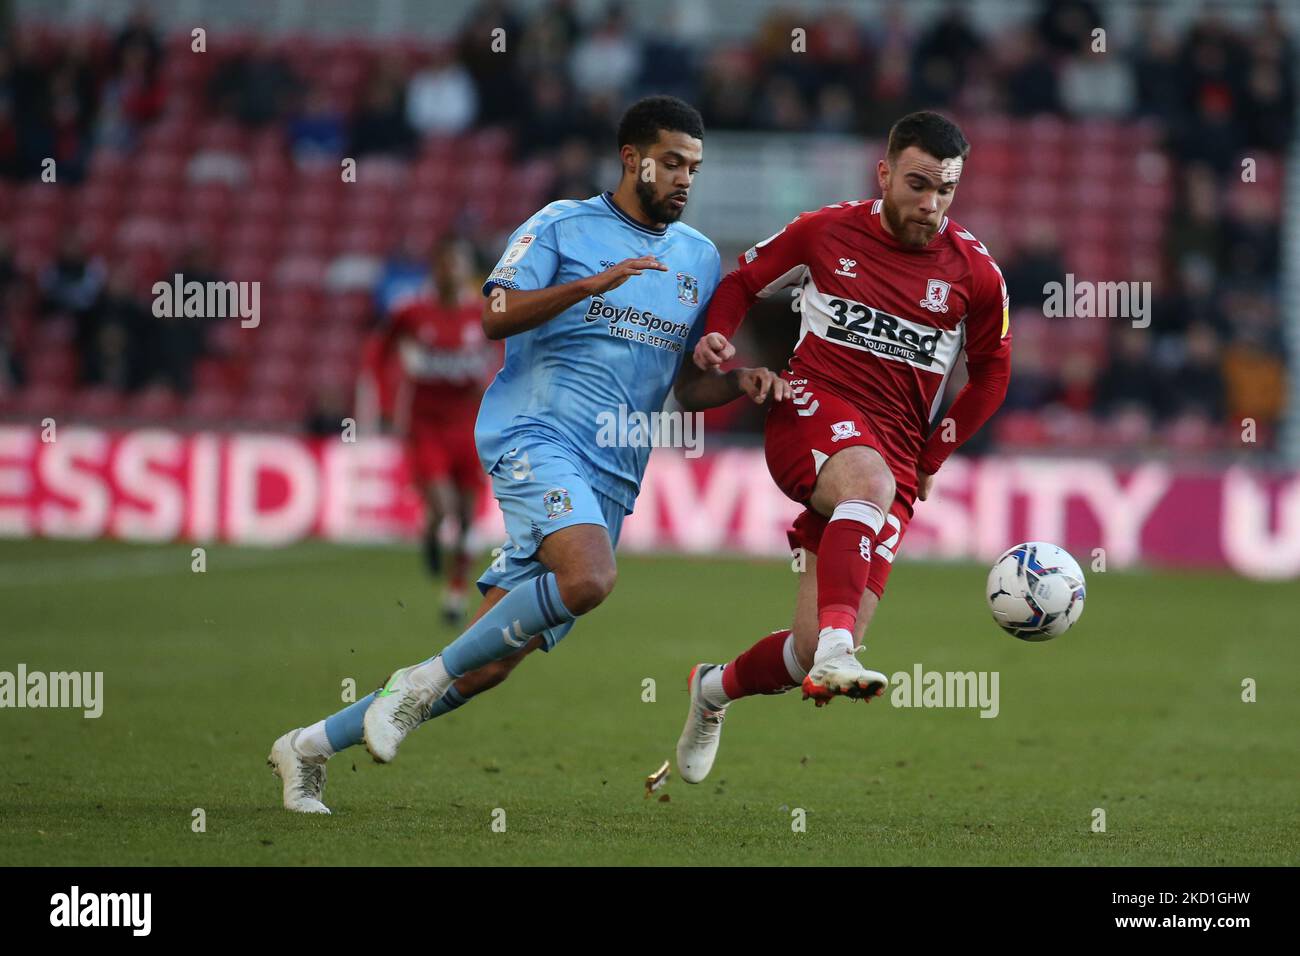 Middlesbrough's Aaron Connolly takes on Coventry City's Jake Clarke-Salterduring the Sky Bet Championship match between Middlesbrough and Coventry City at the Riverside Stadium, Middlesbrough on Saturday 29th January 2022. (Photo by Michael Driver/MI News/NurPhoto) Stock Photo